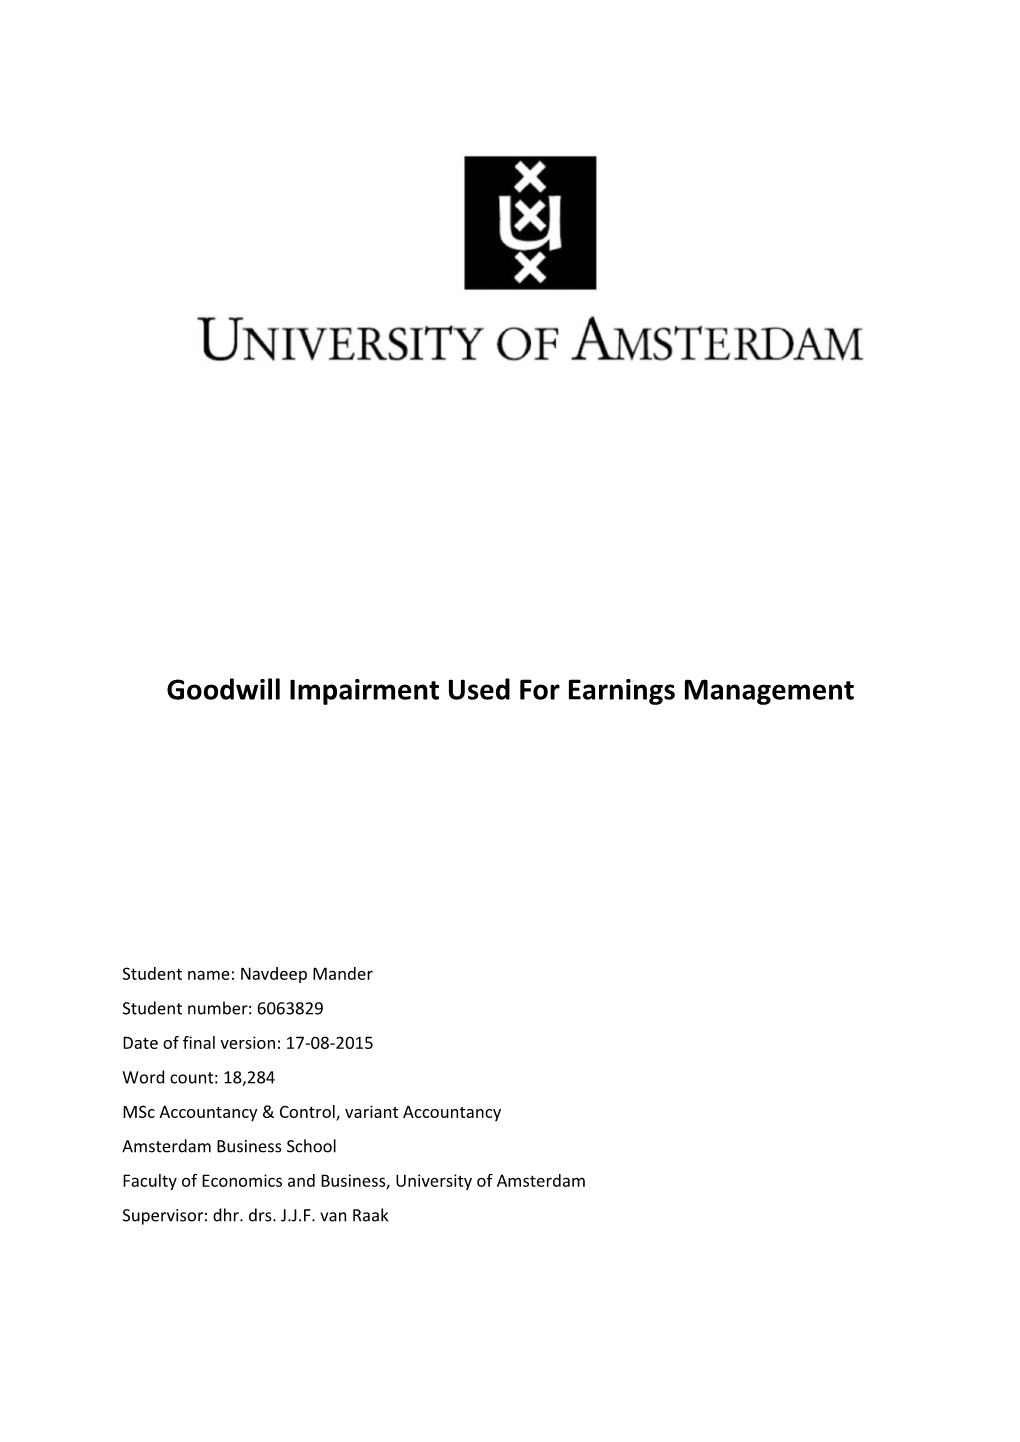 Goodwill Impairment Used for Earnings Management